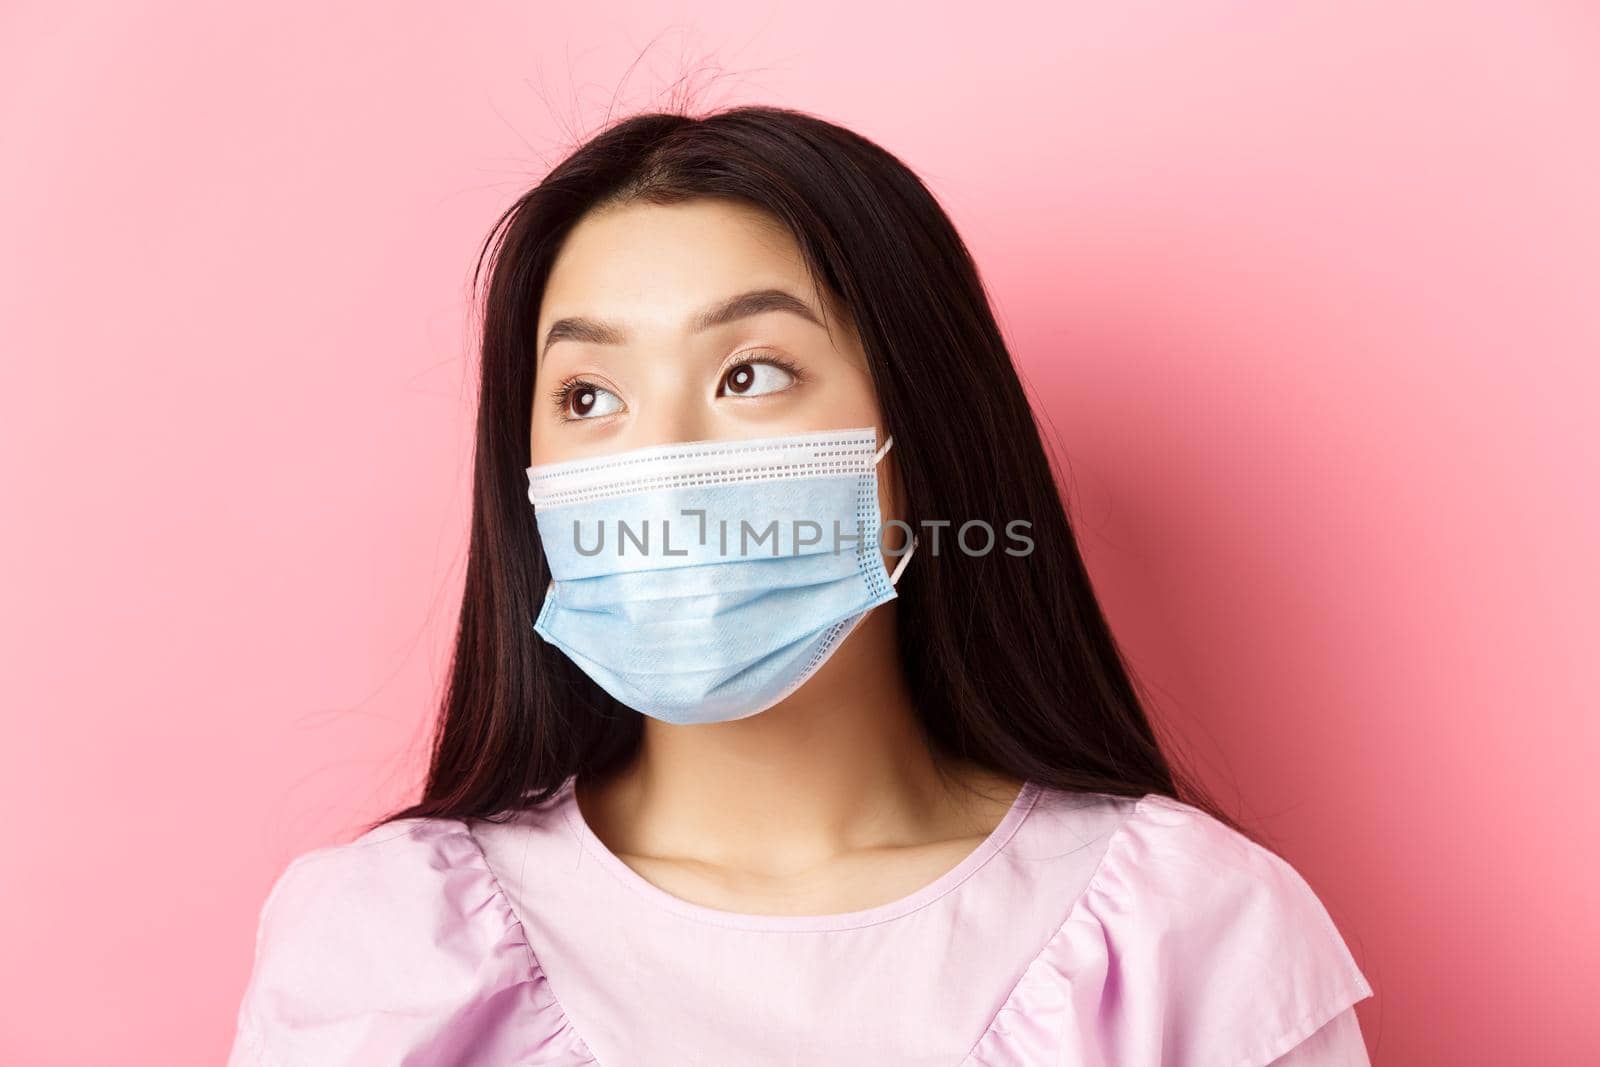 Covid-19, pandemic and quarantine concept. Close-up of dreamy asian girl in medical mask looking left at logo with thoughtful face, standing on pink background.